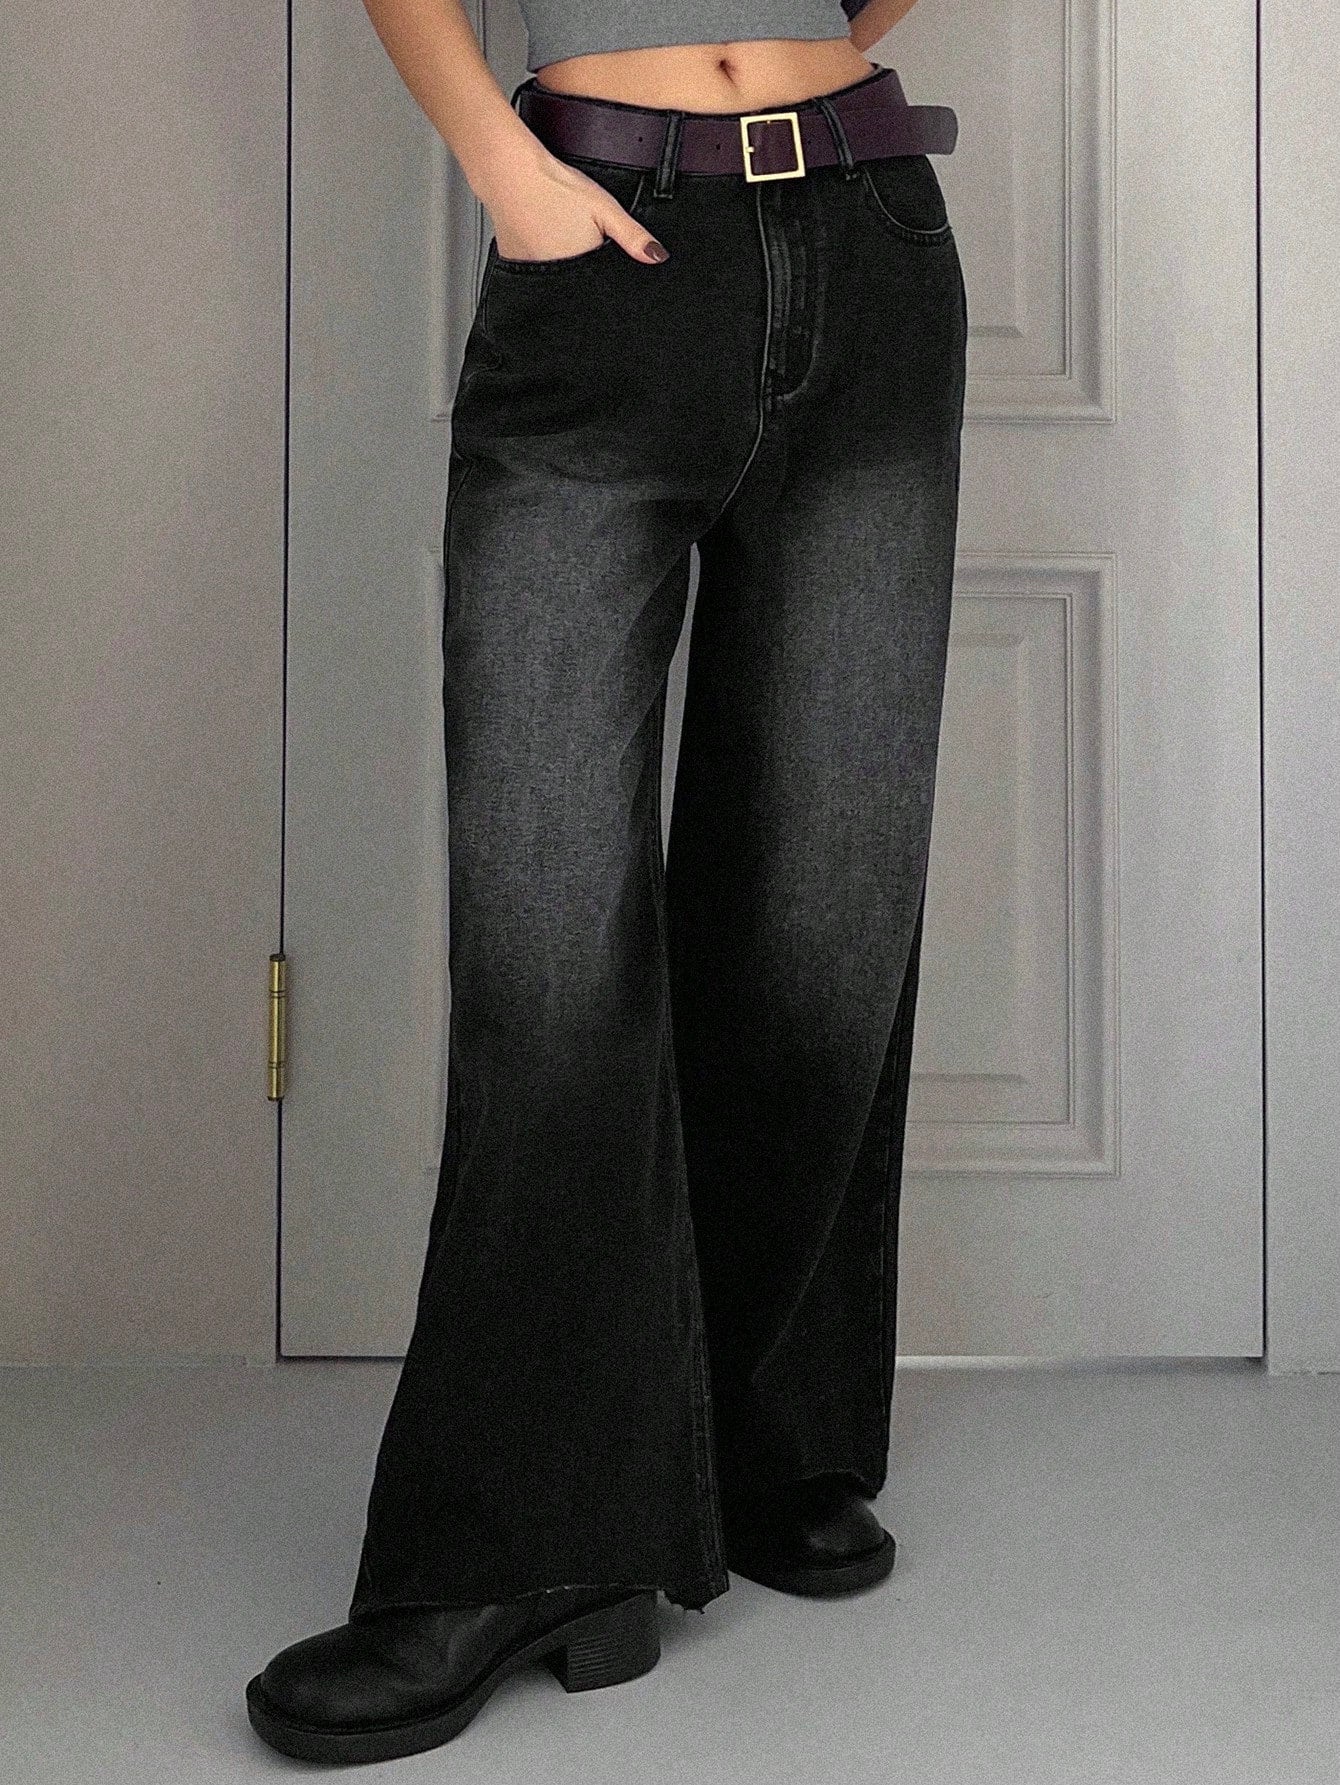 High Waist Pocket Designed Distressed Wide Leg Jeans With Whitening Effect For Women